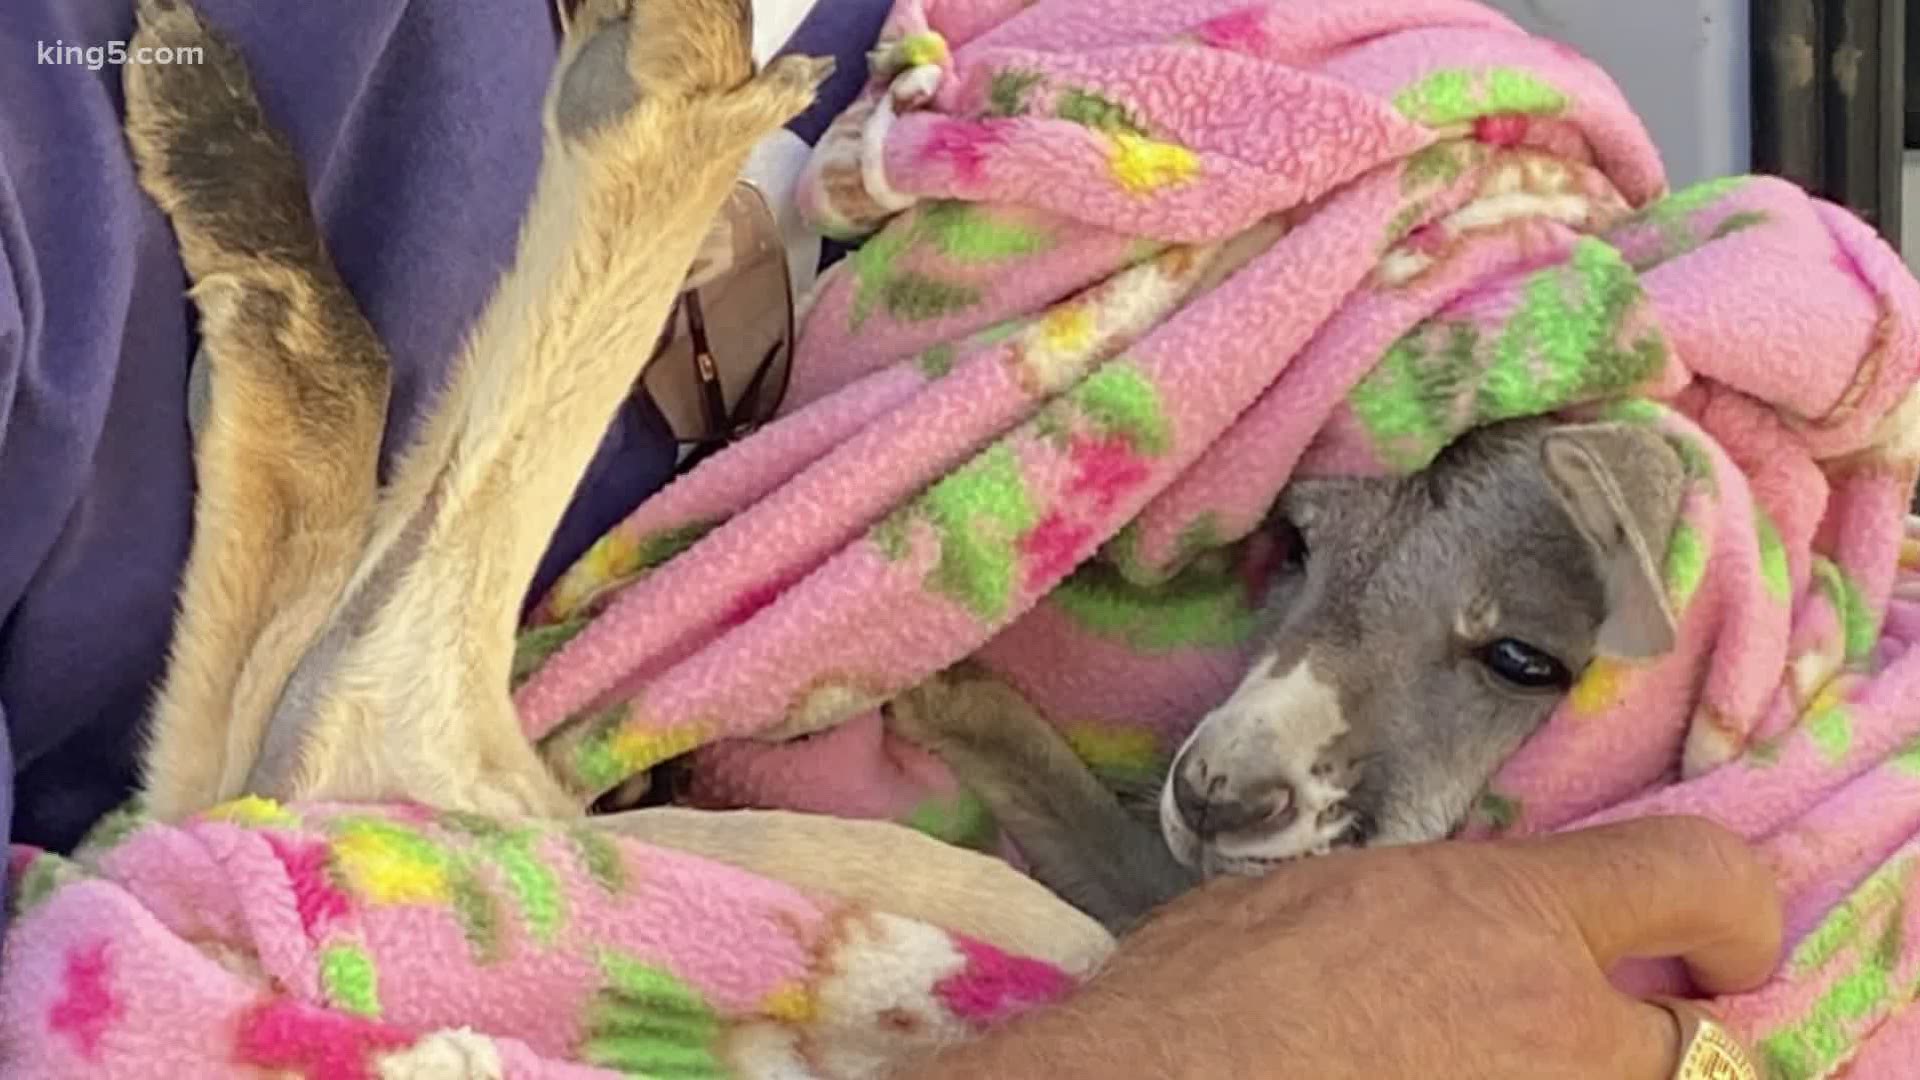 The 8-month-old joey was taken to an animal hospital in Fall City. The incident calls in to question ownership of exotic animals in Washington state.